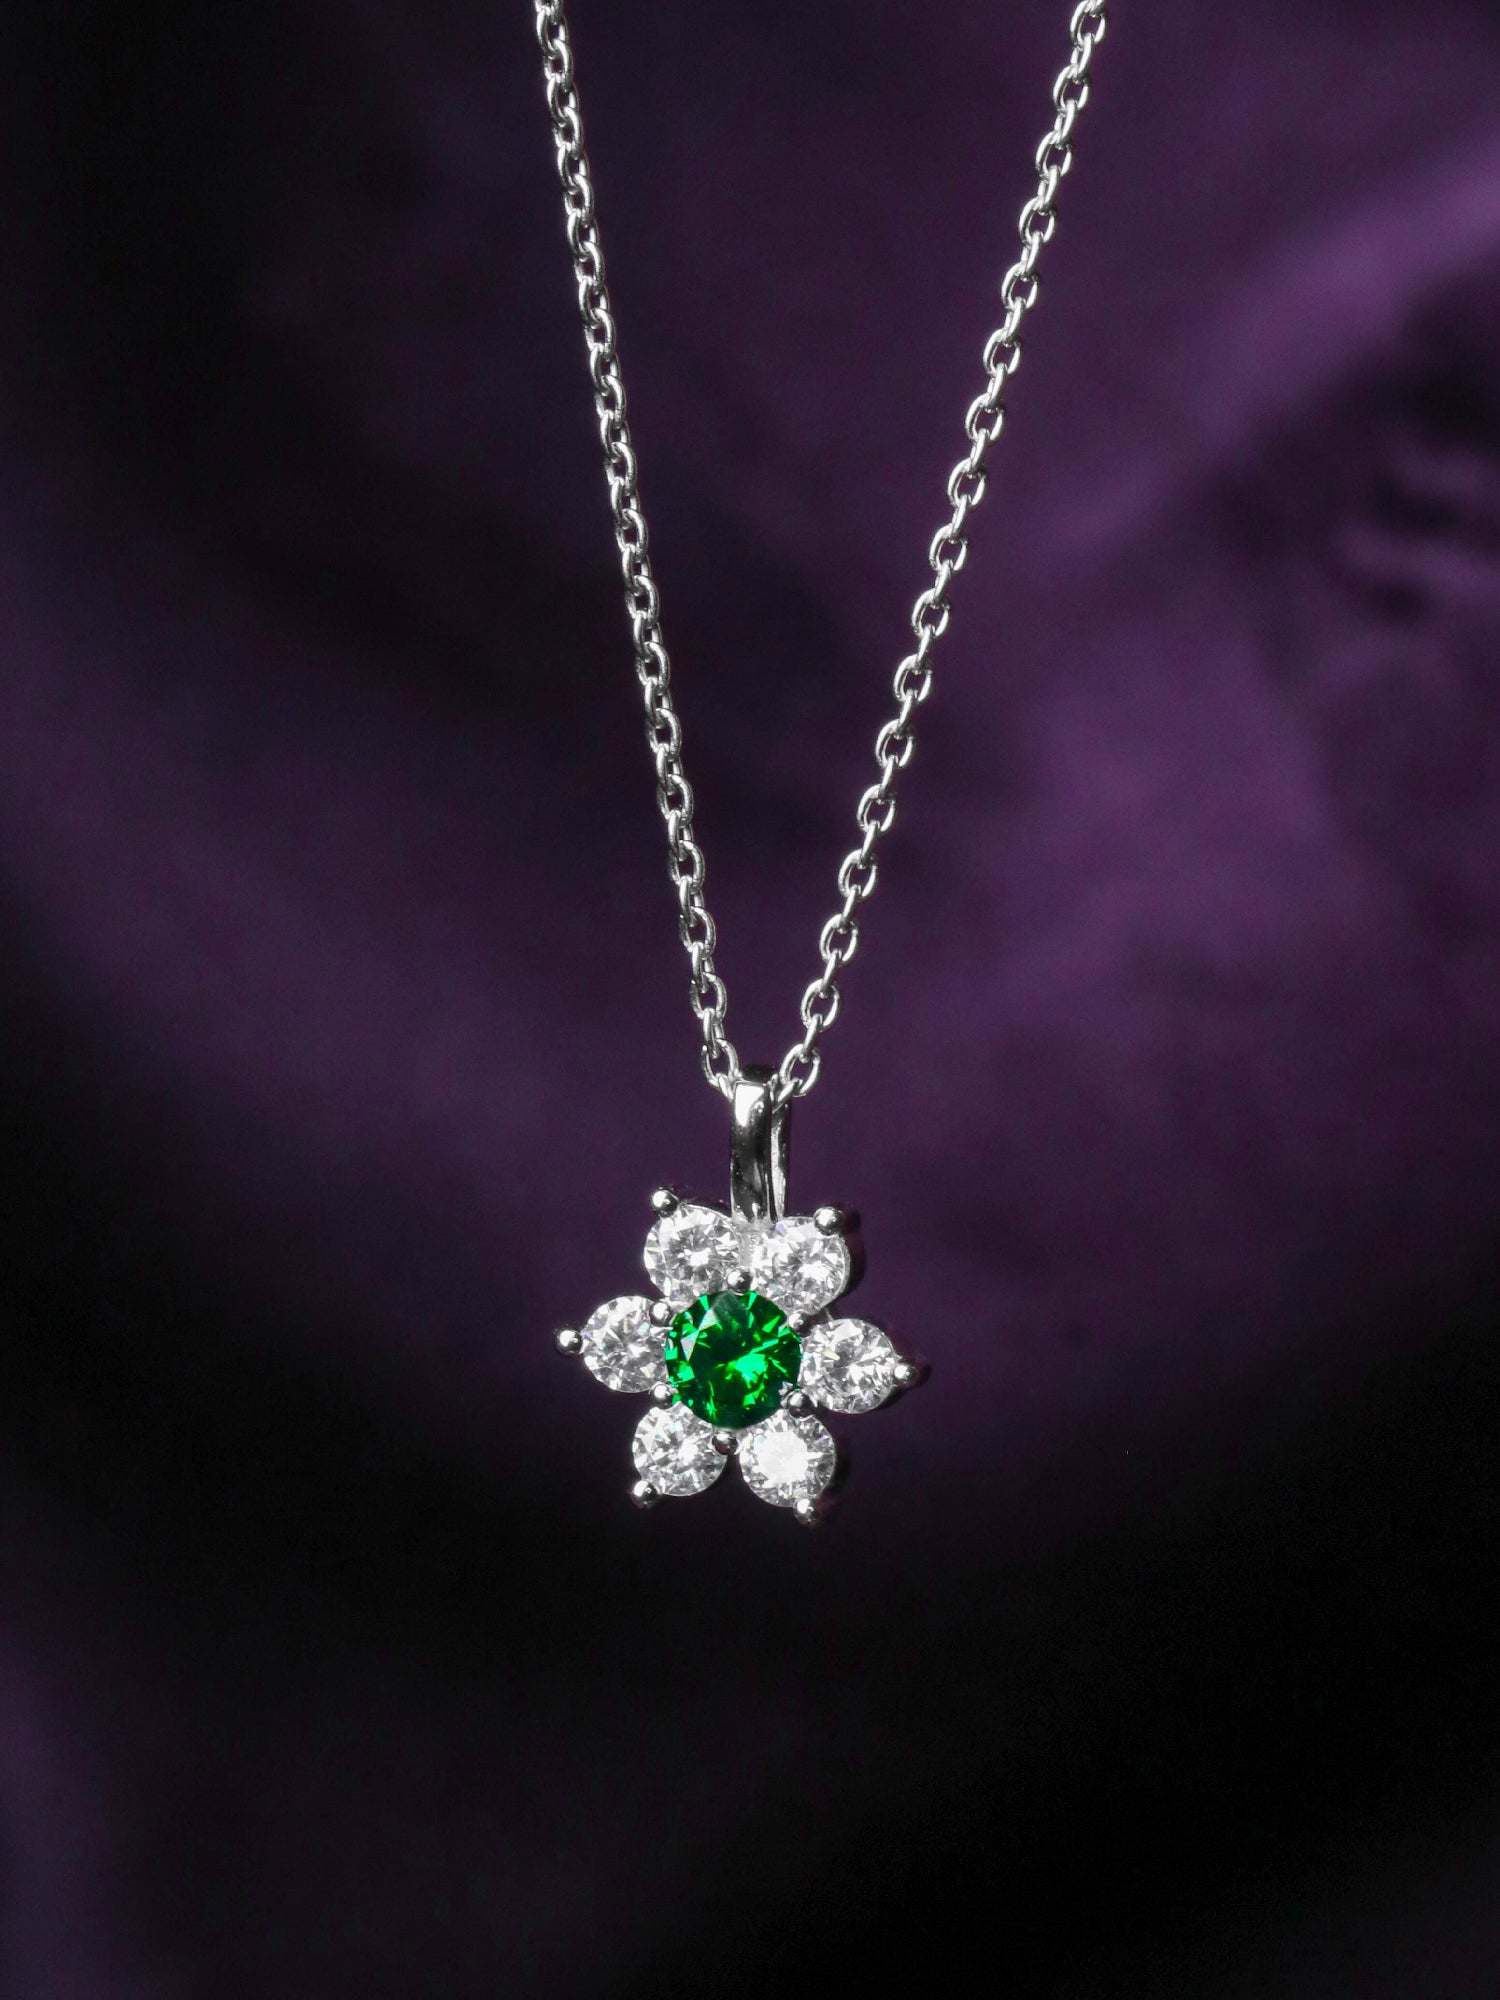 ORNATE JEWELS EMERALD STAR PENDANT WITH CHAIN IN 925 SILVER